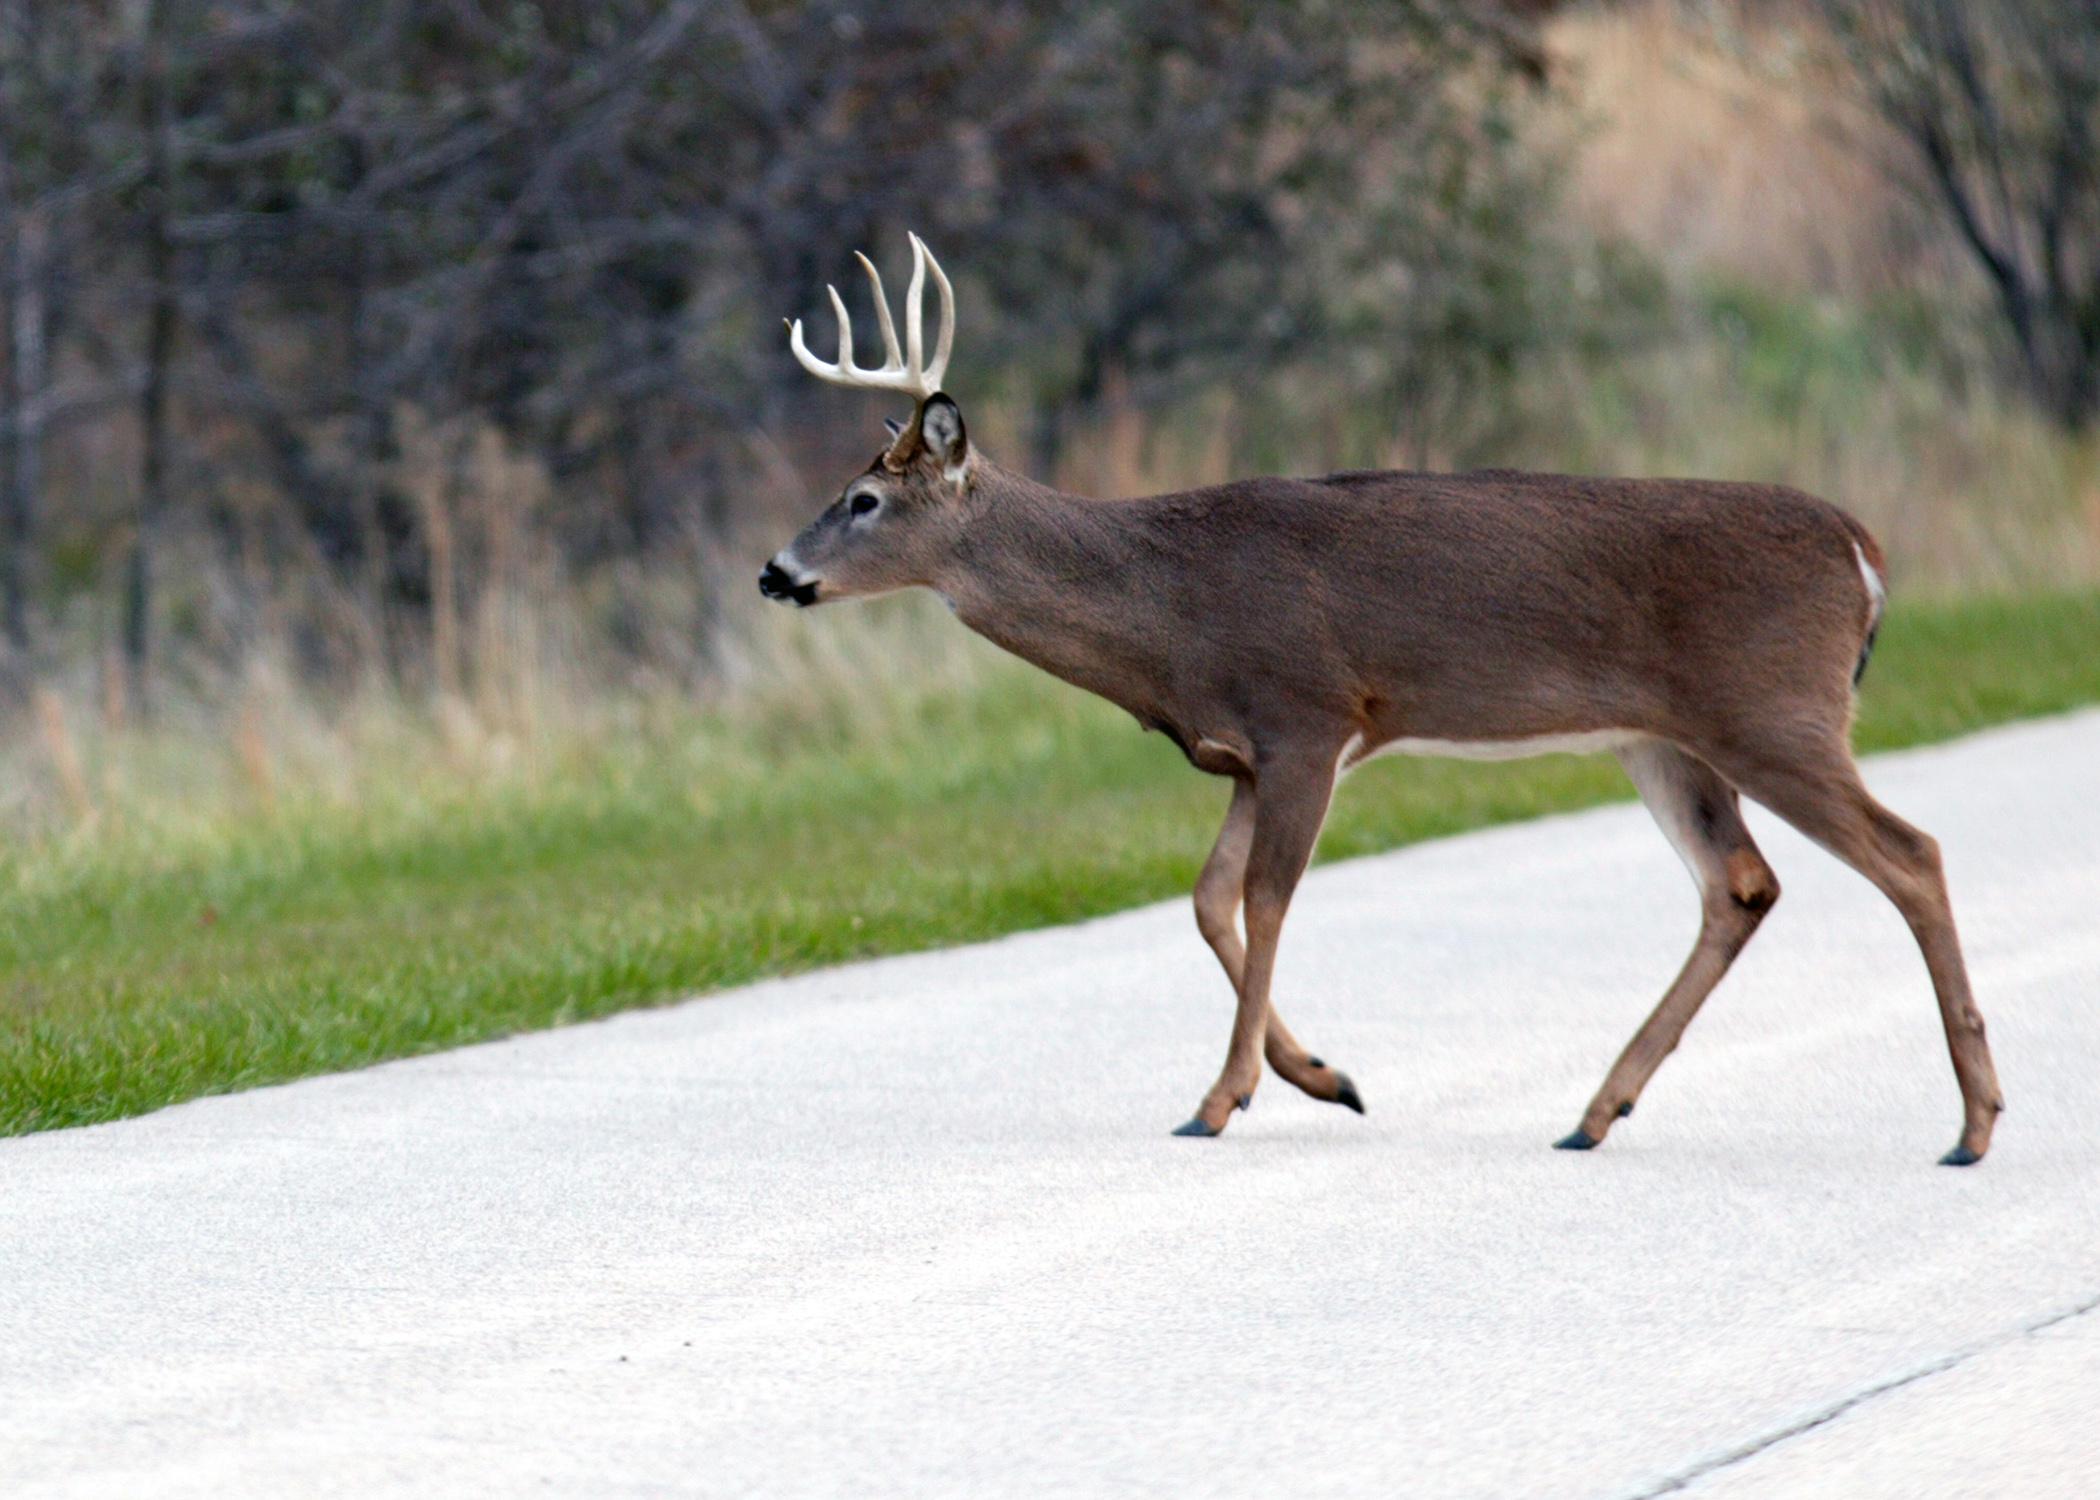 Wildlife-vehicle collisions often occur at dawn and dusk, when wildlife are most active. (Submitted photo)